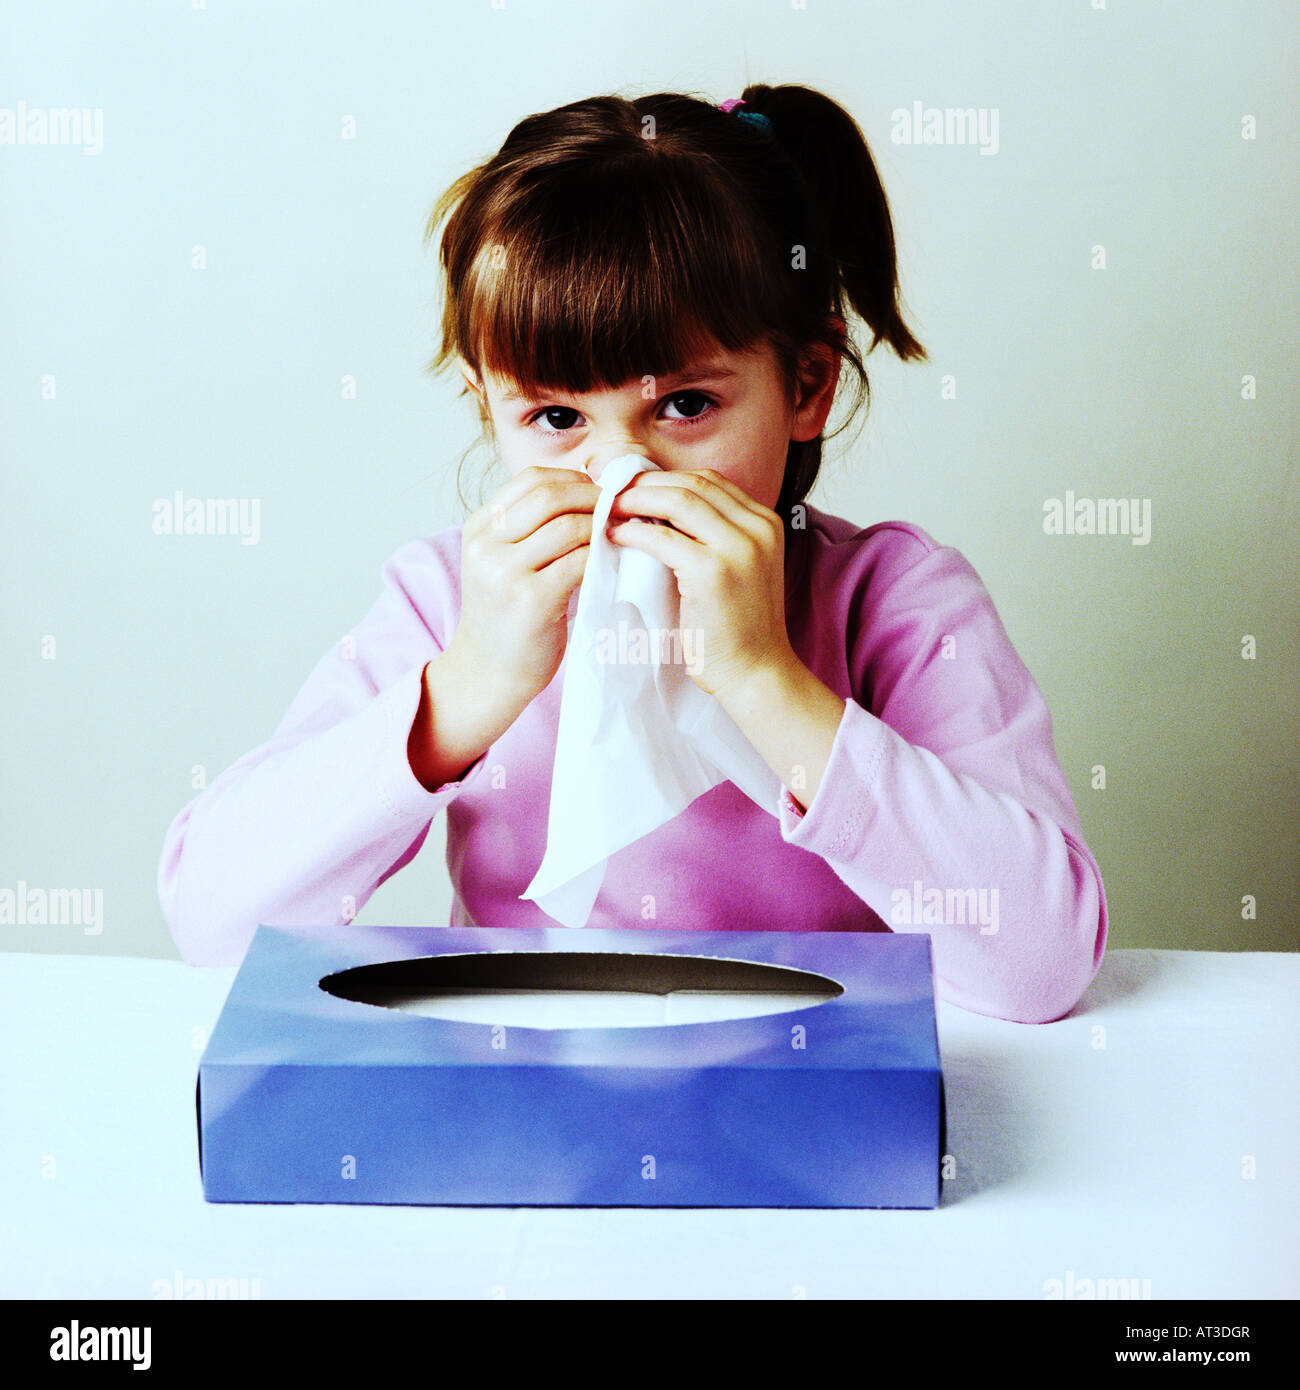 A girl blowing her nose Stock Photo